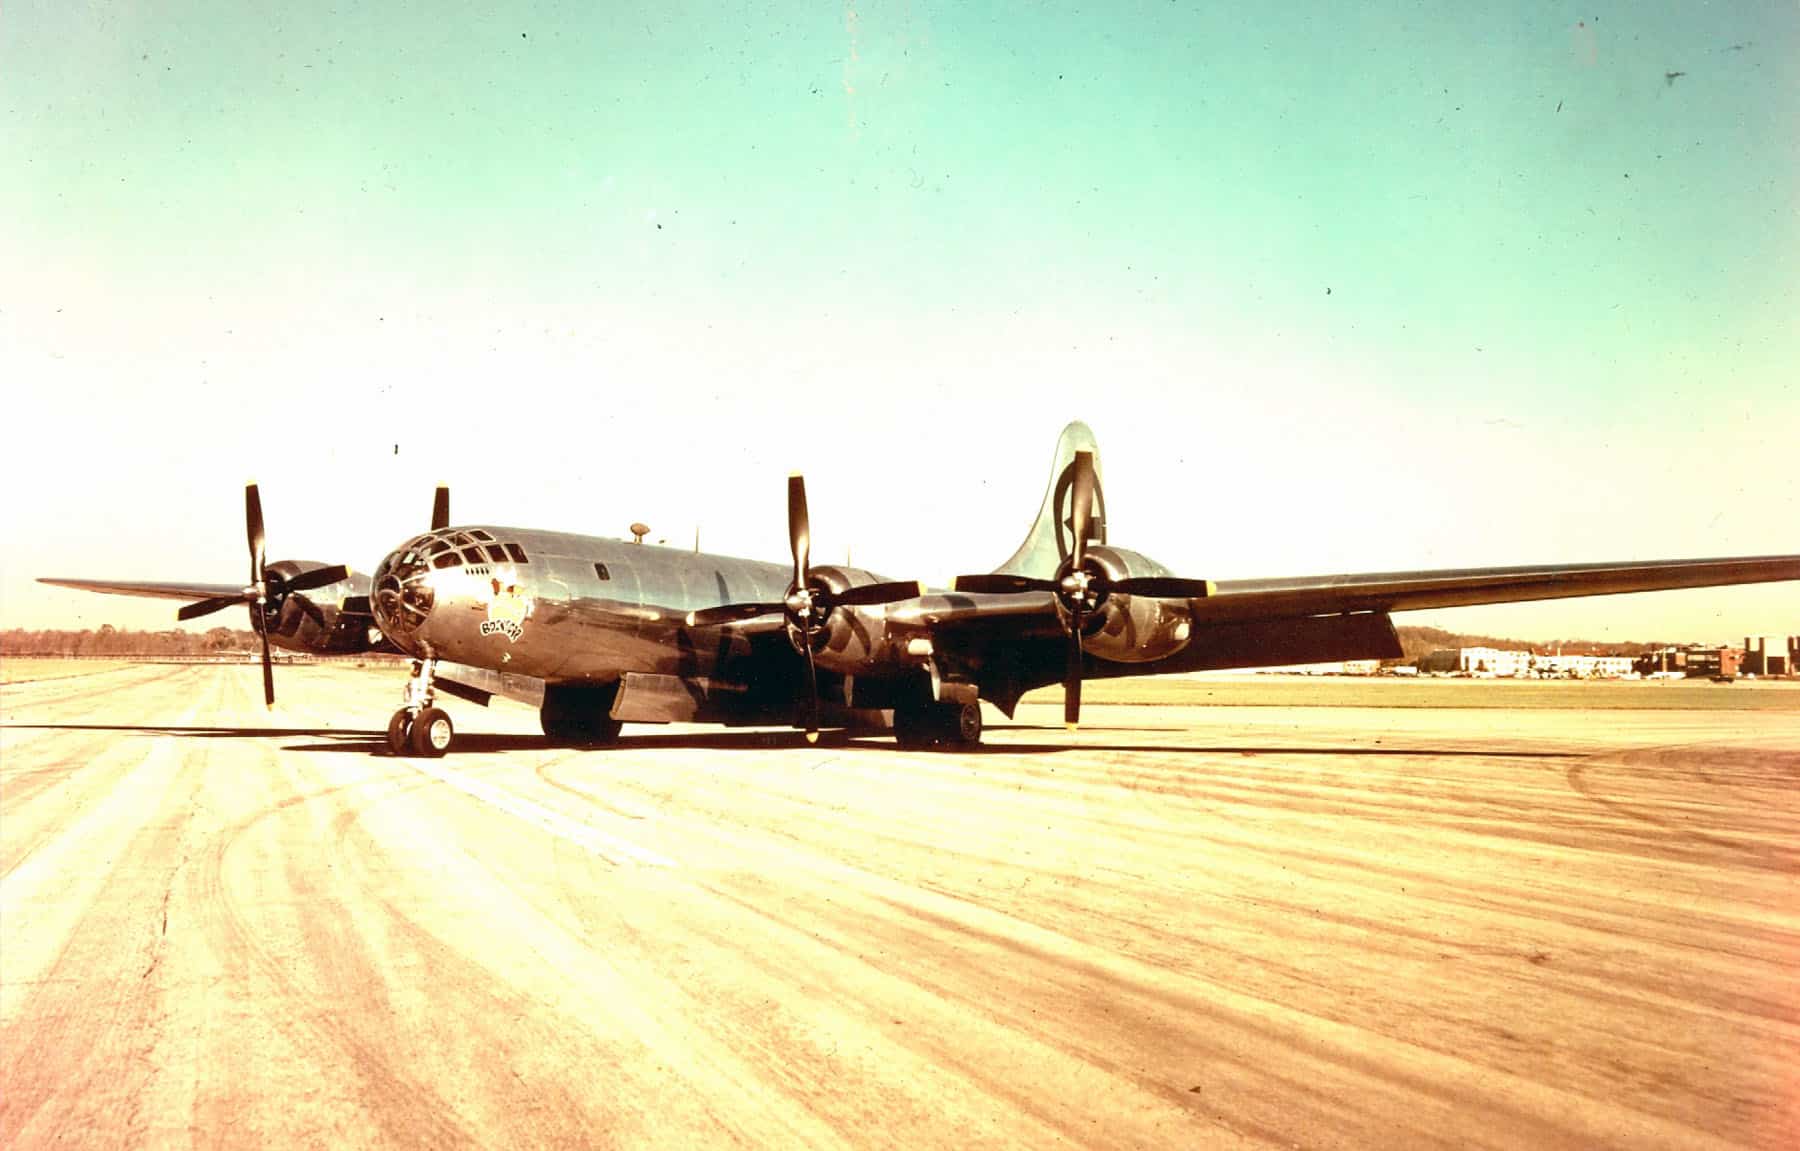 The "Bockscar" B-29 Superfortress was flown to its permanent home at the National Museum of the United States Air Force in Dayton, Ohio, on September 21, 1961. (US Air Force photo)